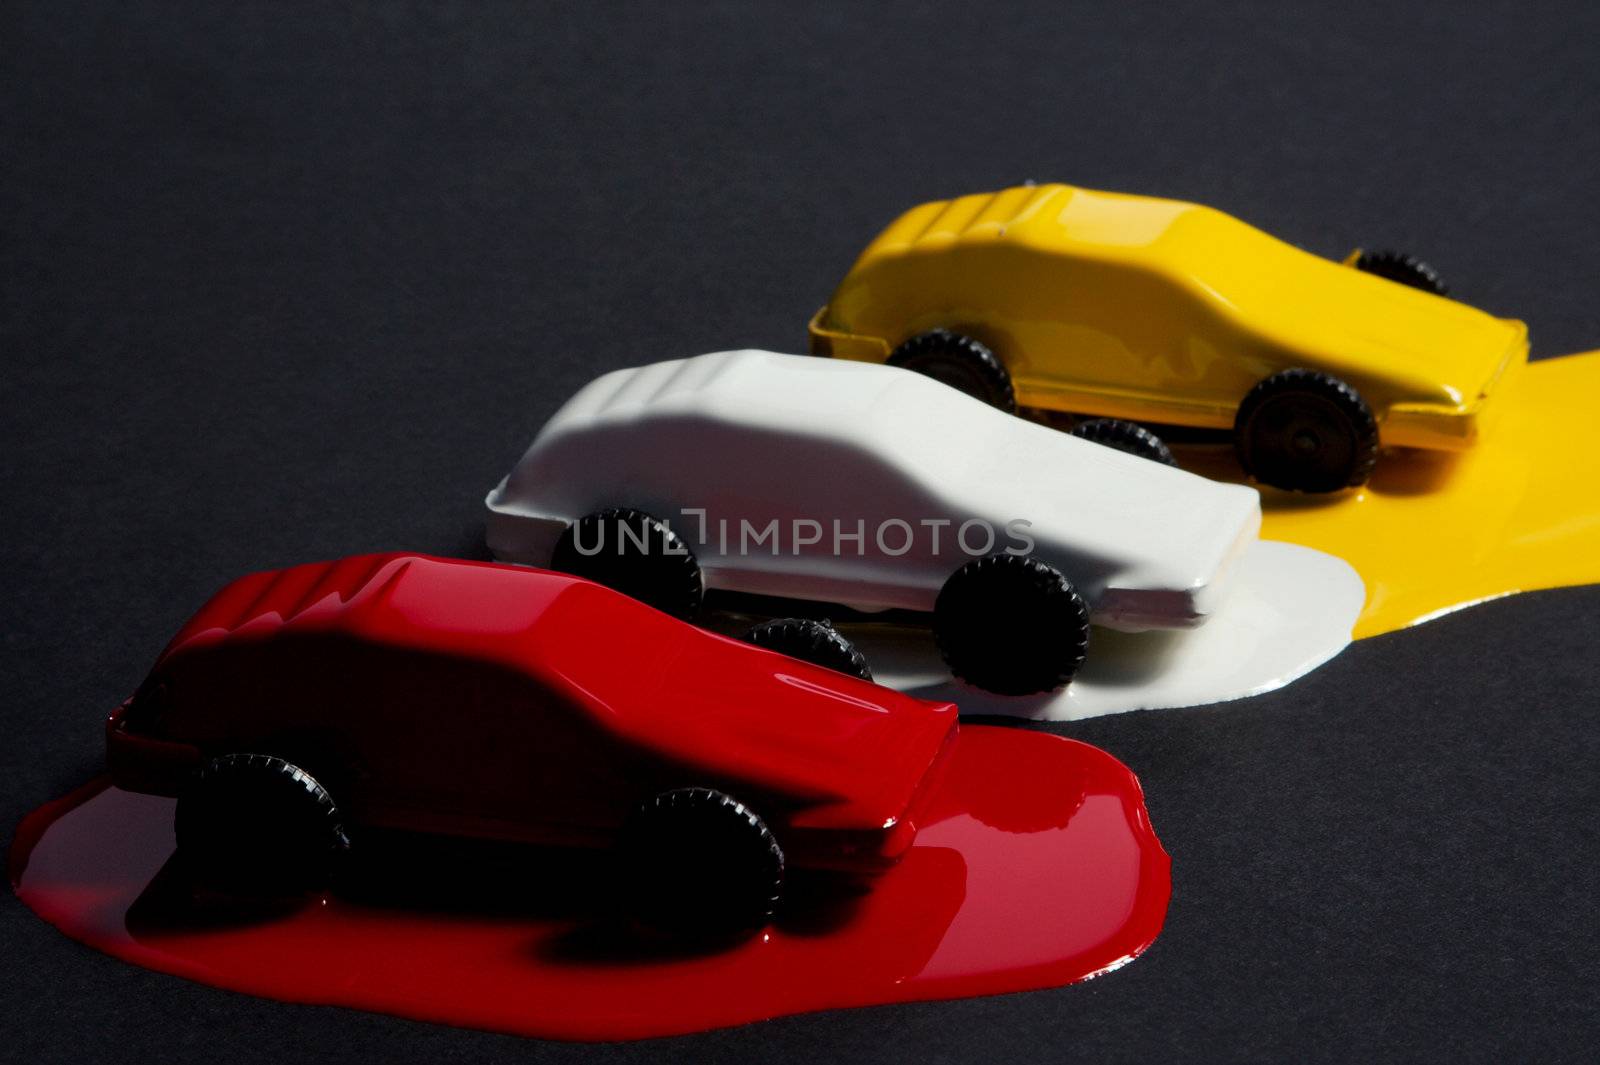 Small copies of sports automobiles filled with a paint